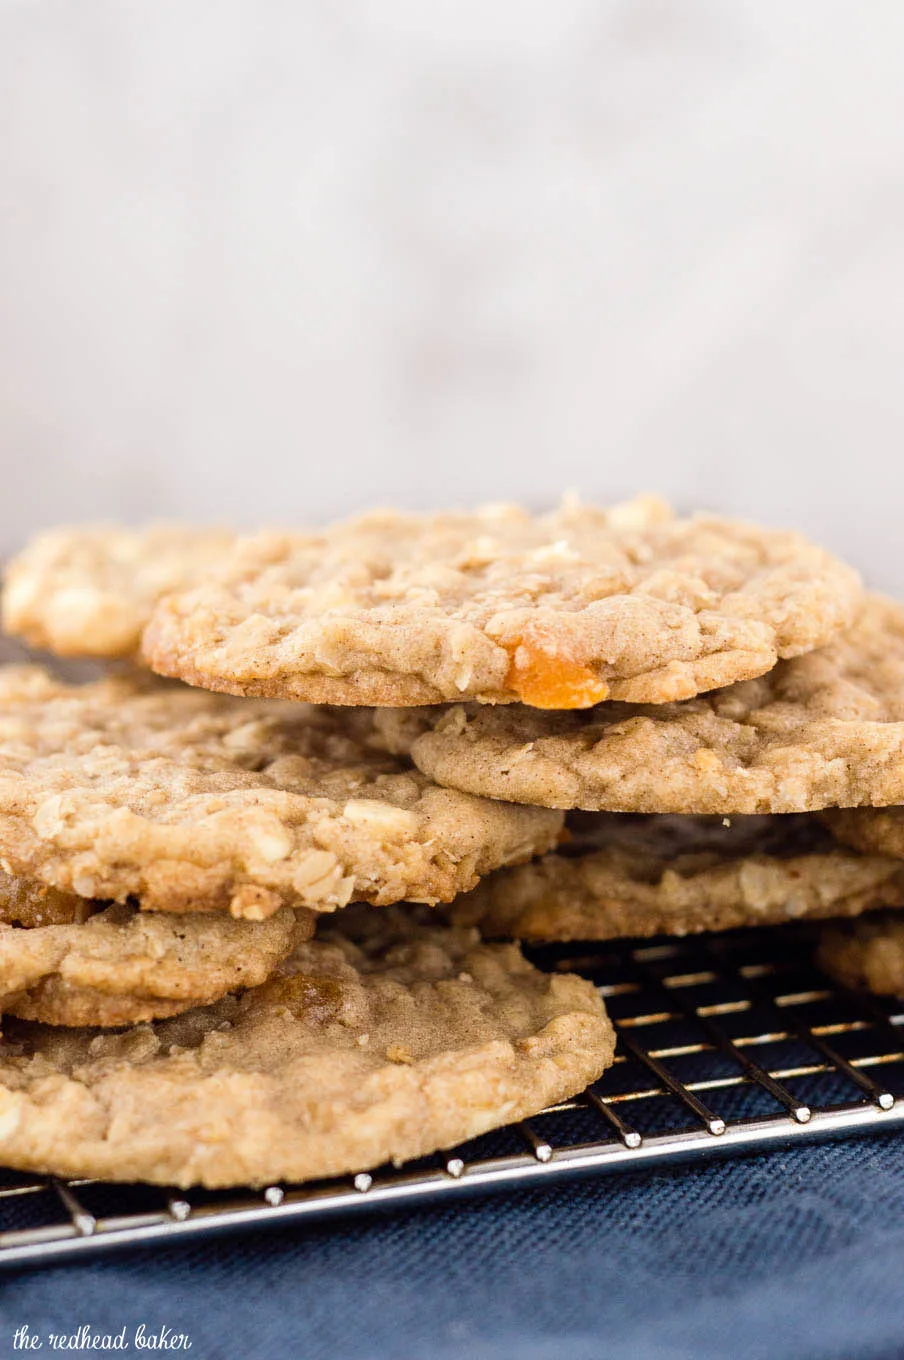 White chocolate apricot oatmeal cookies are crisp at the edges and tender in the middle, and loaded with delicious white chocolate chips and dried apricot pieces.